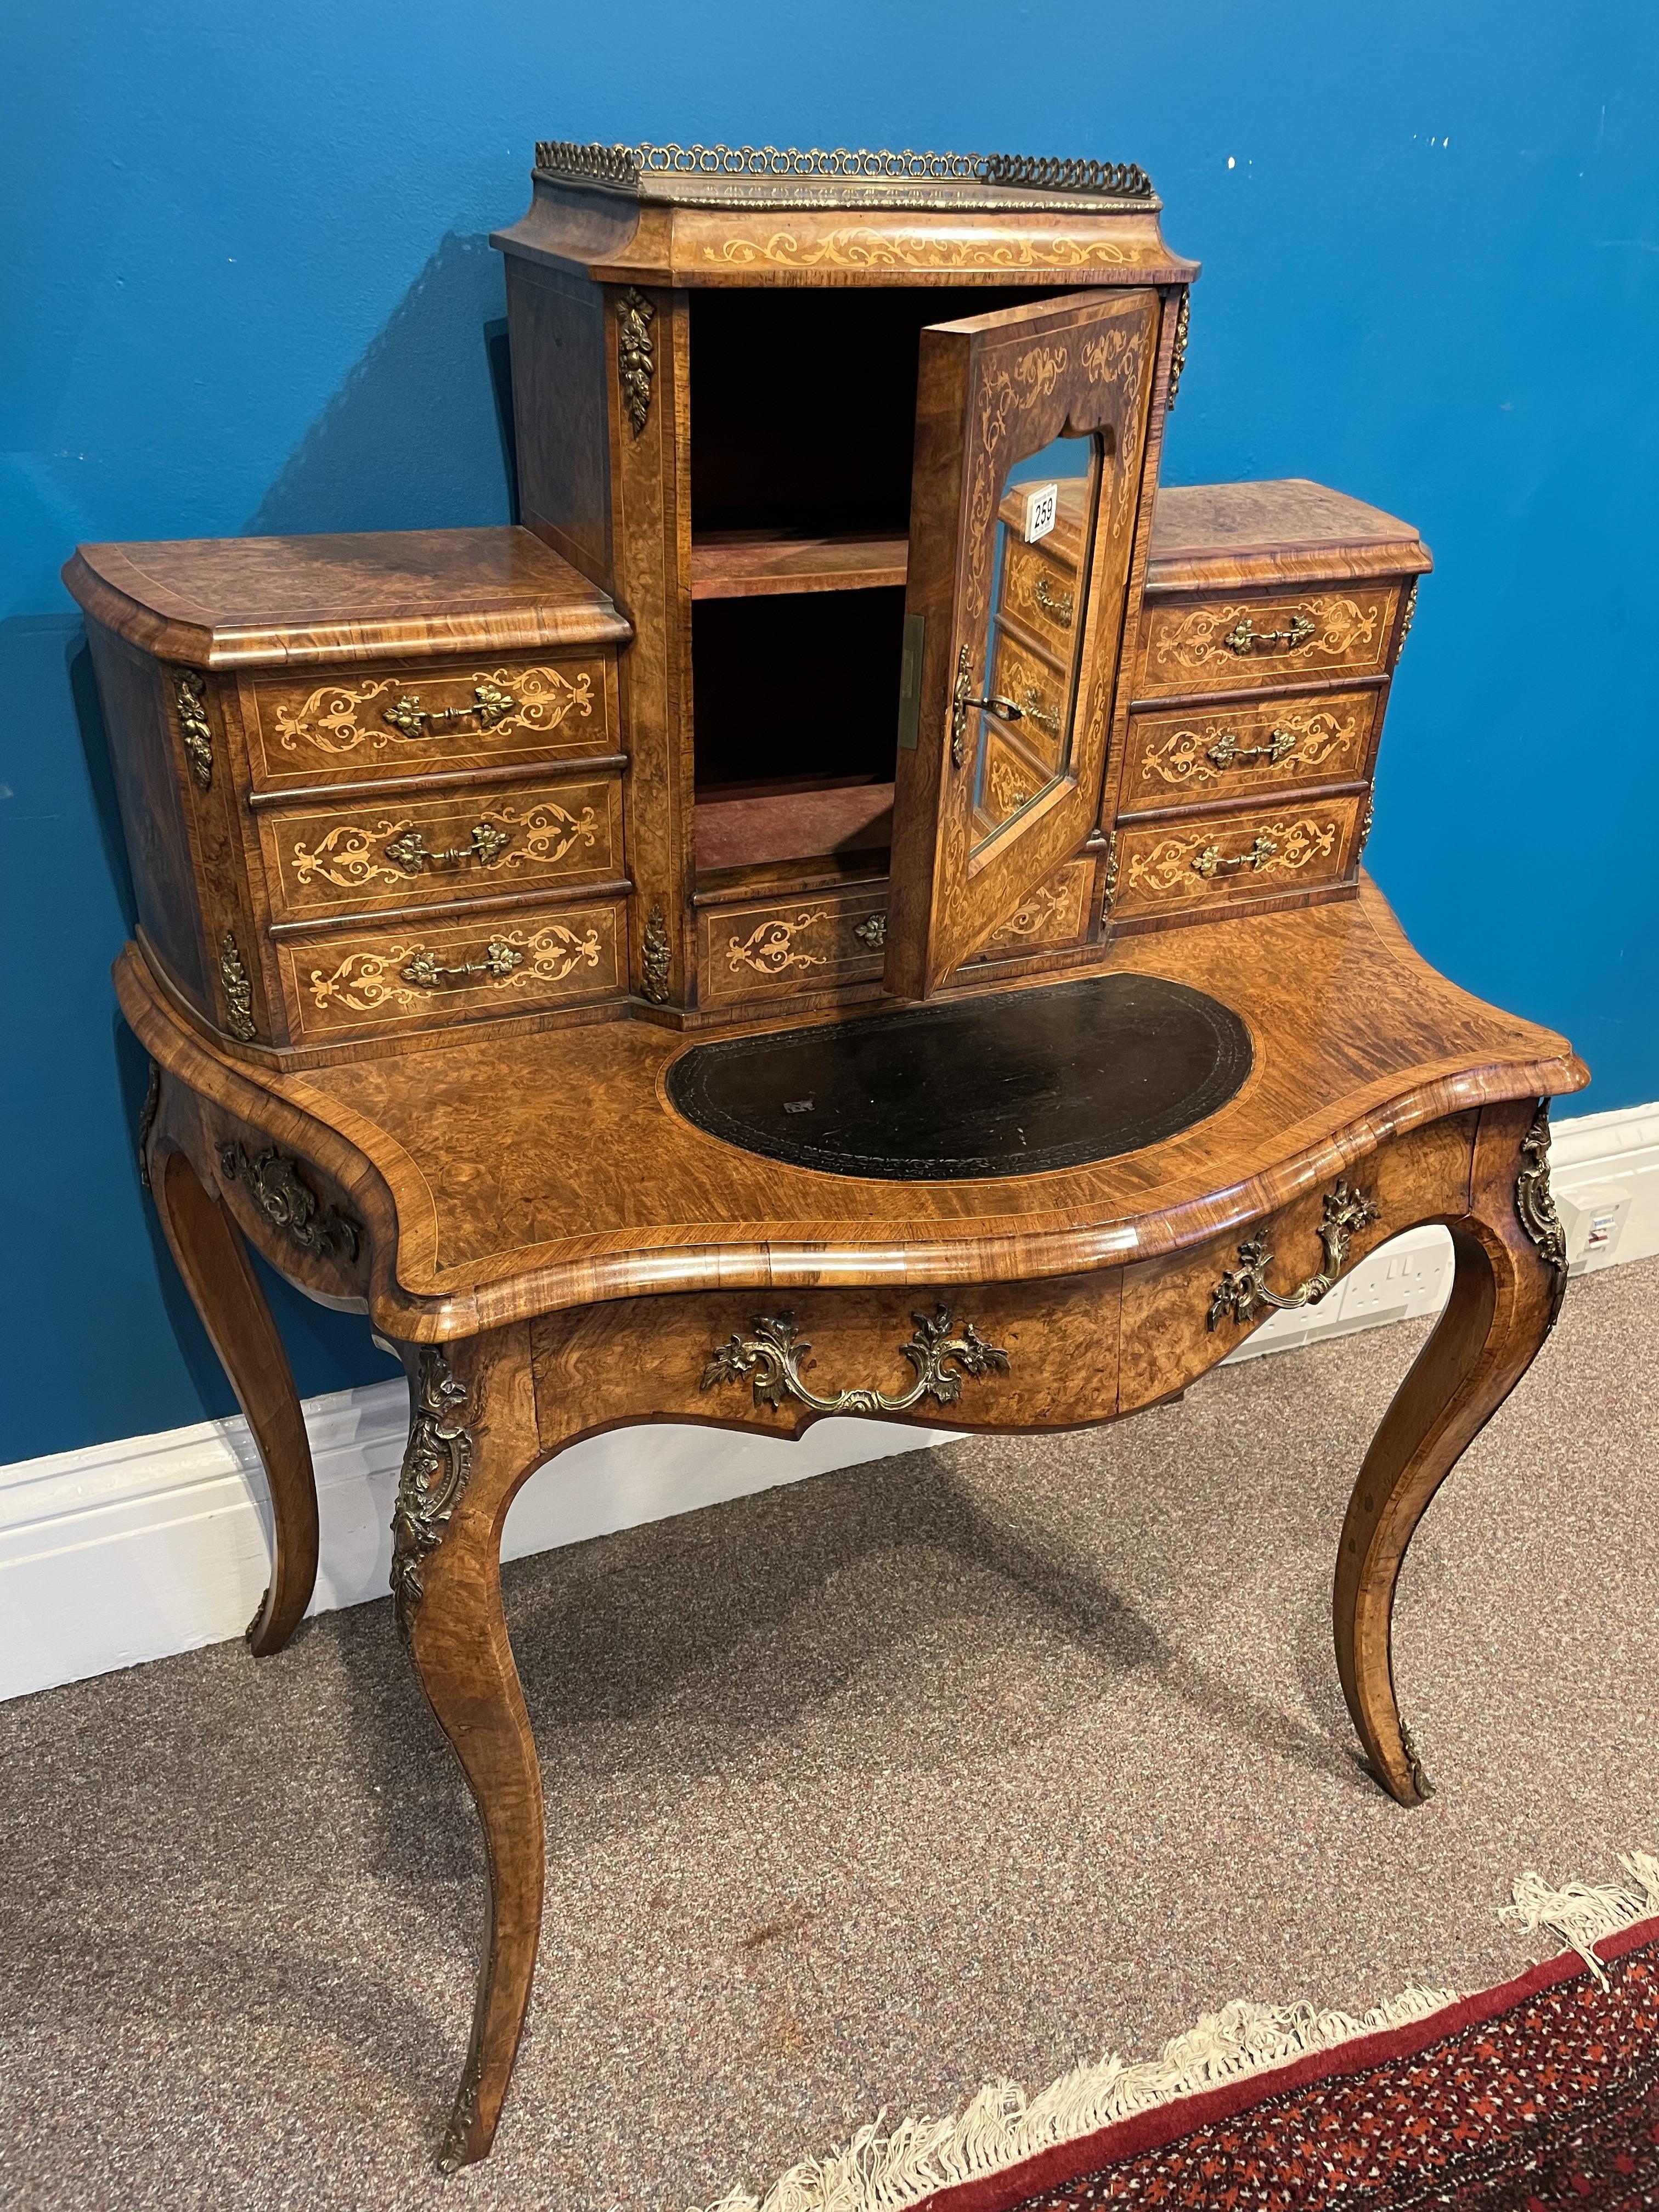 A 19th century French Walnut 'Bon-De-Jour' desk with extensive marquetry, leather insert. - Image 2 of 2